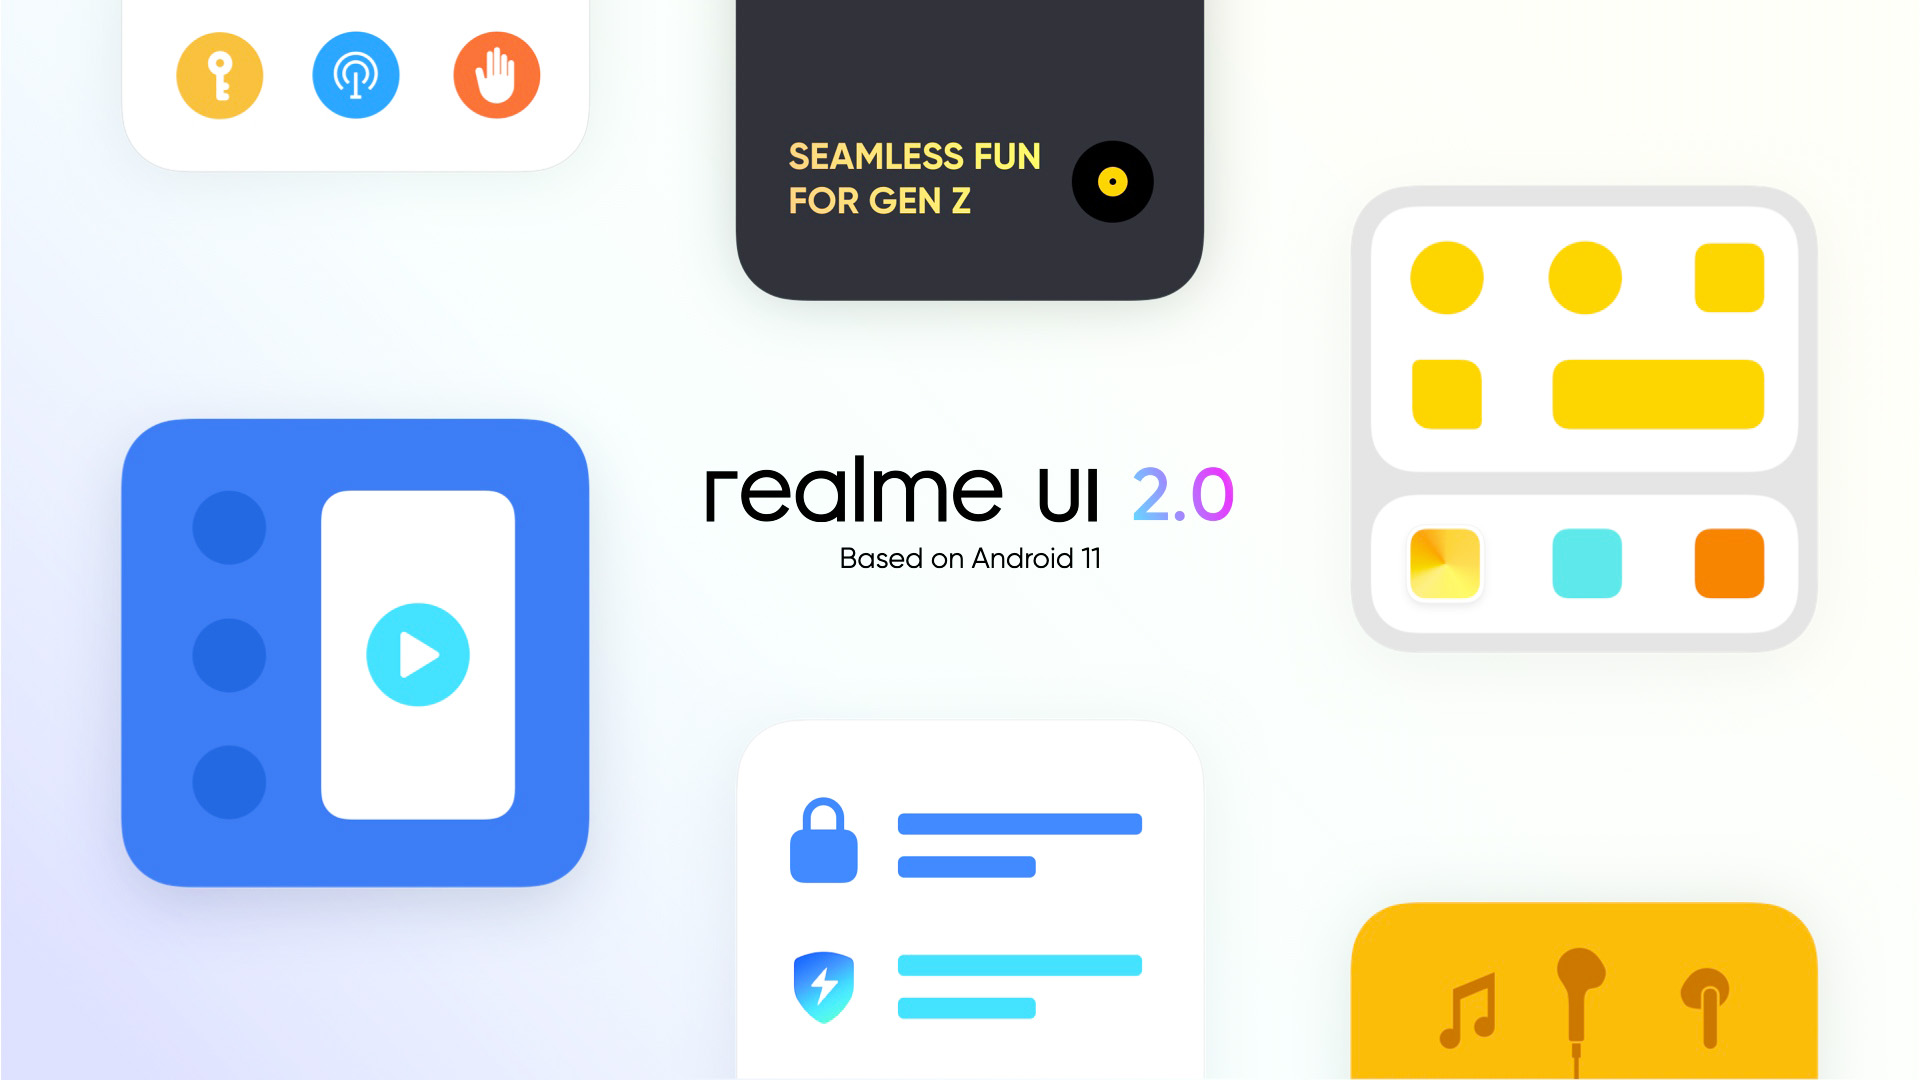 Realme 7 is in the early access stage to get UI 2.0